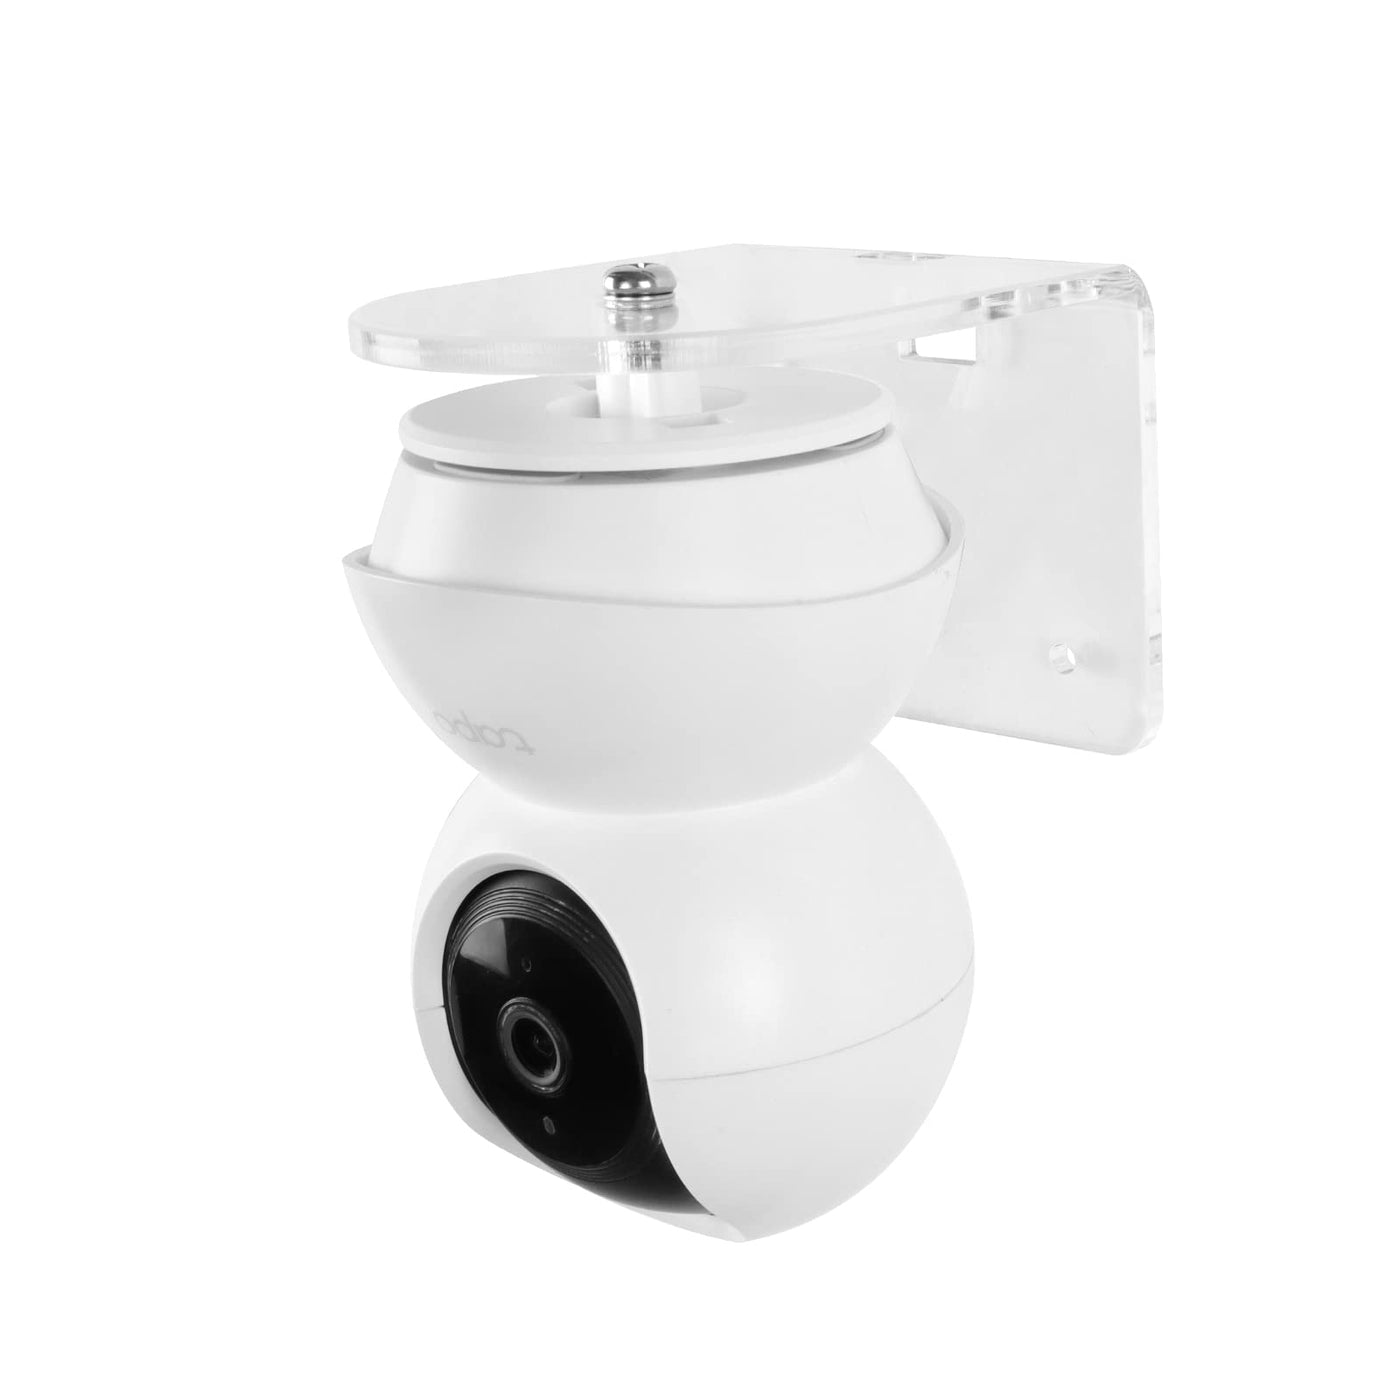 OkeMeeo Wall Mount for TP-Link Tapo C210 2K Pan Tilt Security Camera and TP-Link Tapo C200